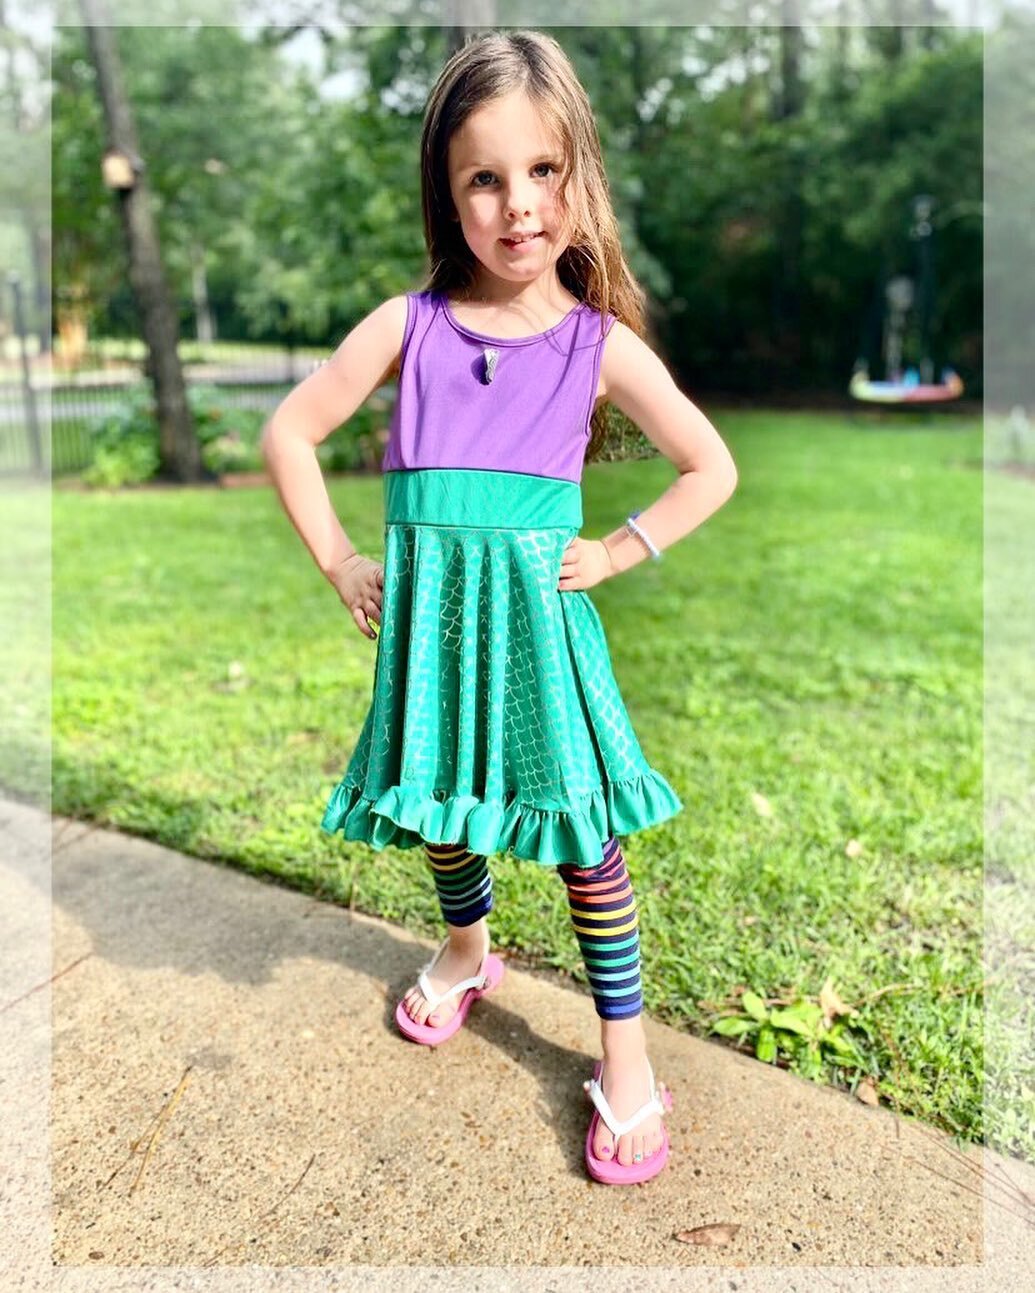 𝑹𝒆𝒂𝒅𝒚 𝒂𝒏𝒅 𝒓𝒂𝒓𝒊𝒏𝒈 𝒕𝒐 𝒈𝒐 🇺🇸🐢

We are so excited to introduce you to our latest TC Ambassador!

This is the gorgeous Annalise! She lives with mum Lauren in Texas and is part of our extended Tc family!

We can&rsquo;t wait to see the